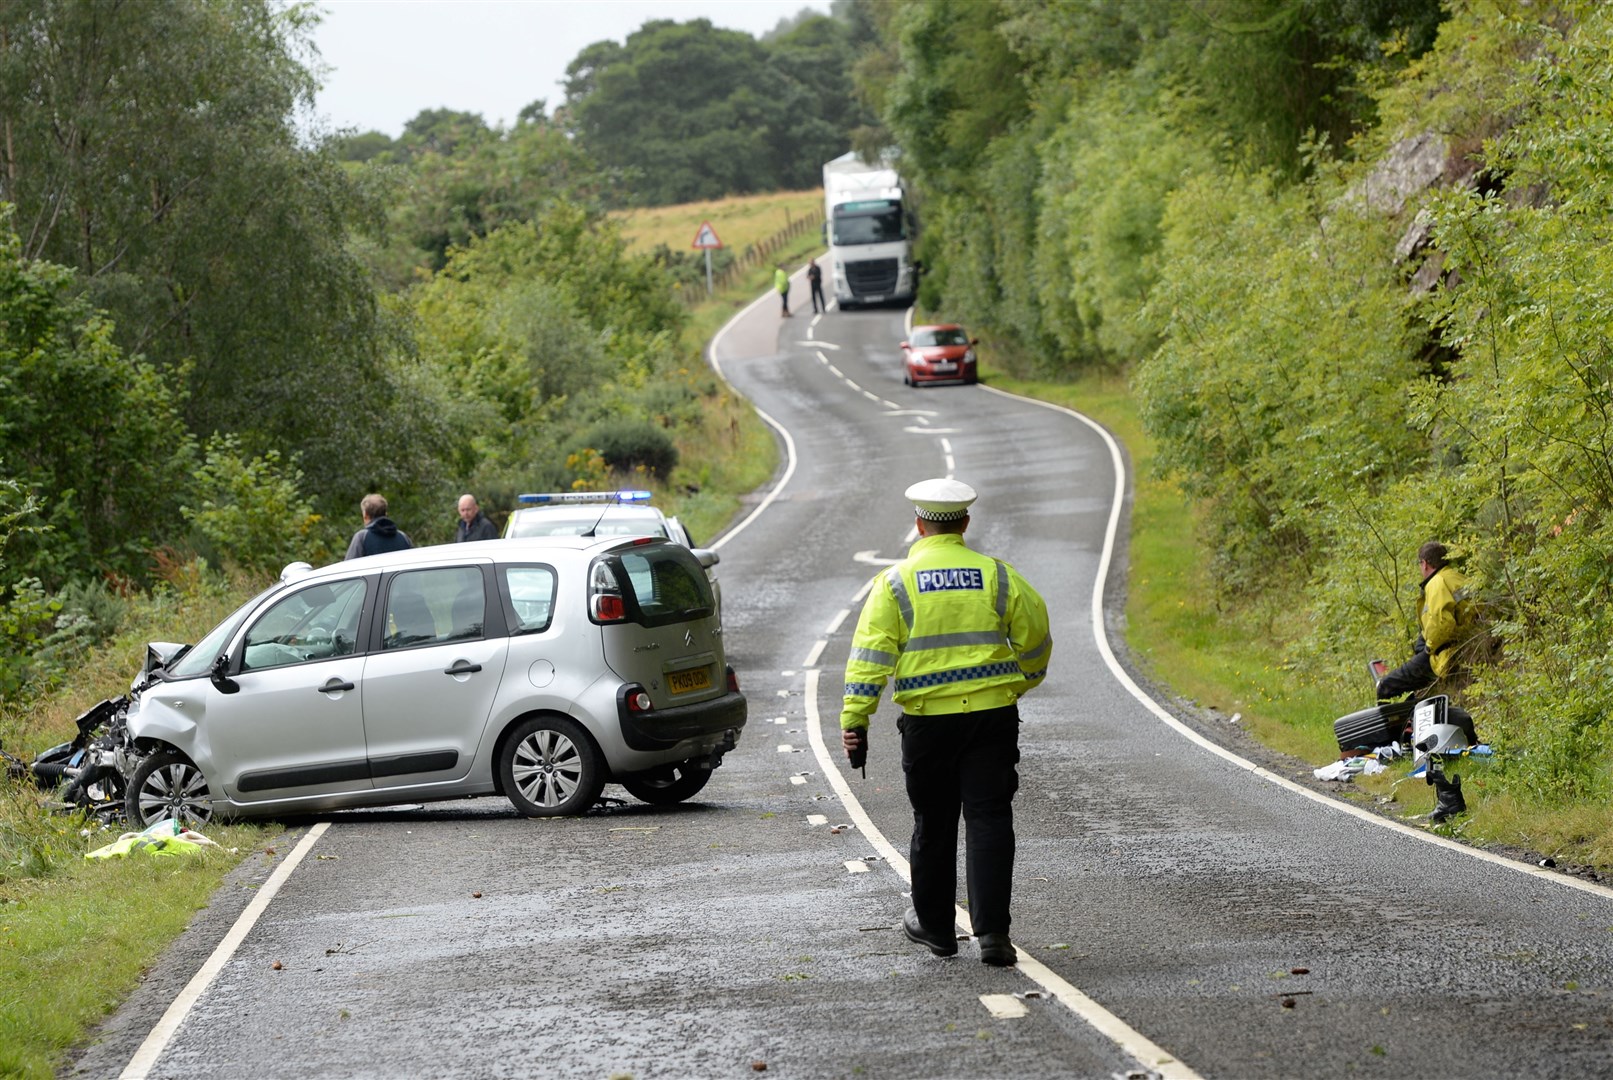 Campaigners want the A82 to be upgraded in a bid to make in safer and in hope it will reduce the number of accidents.